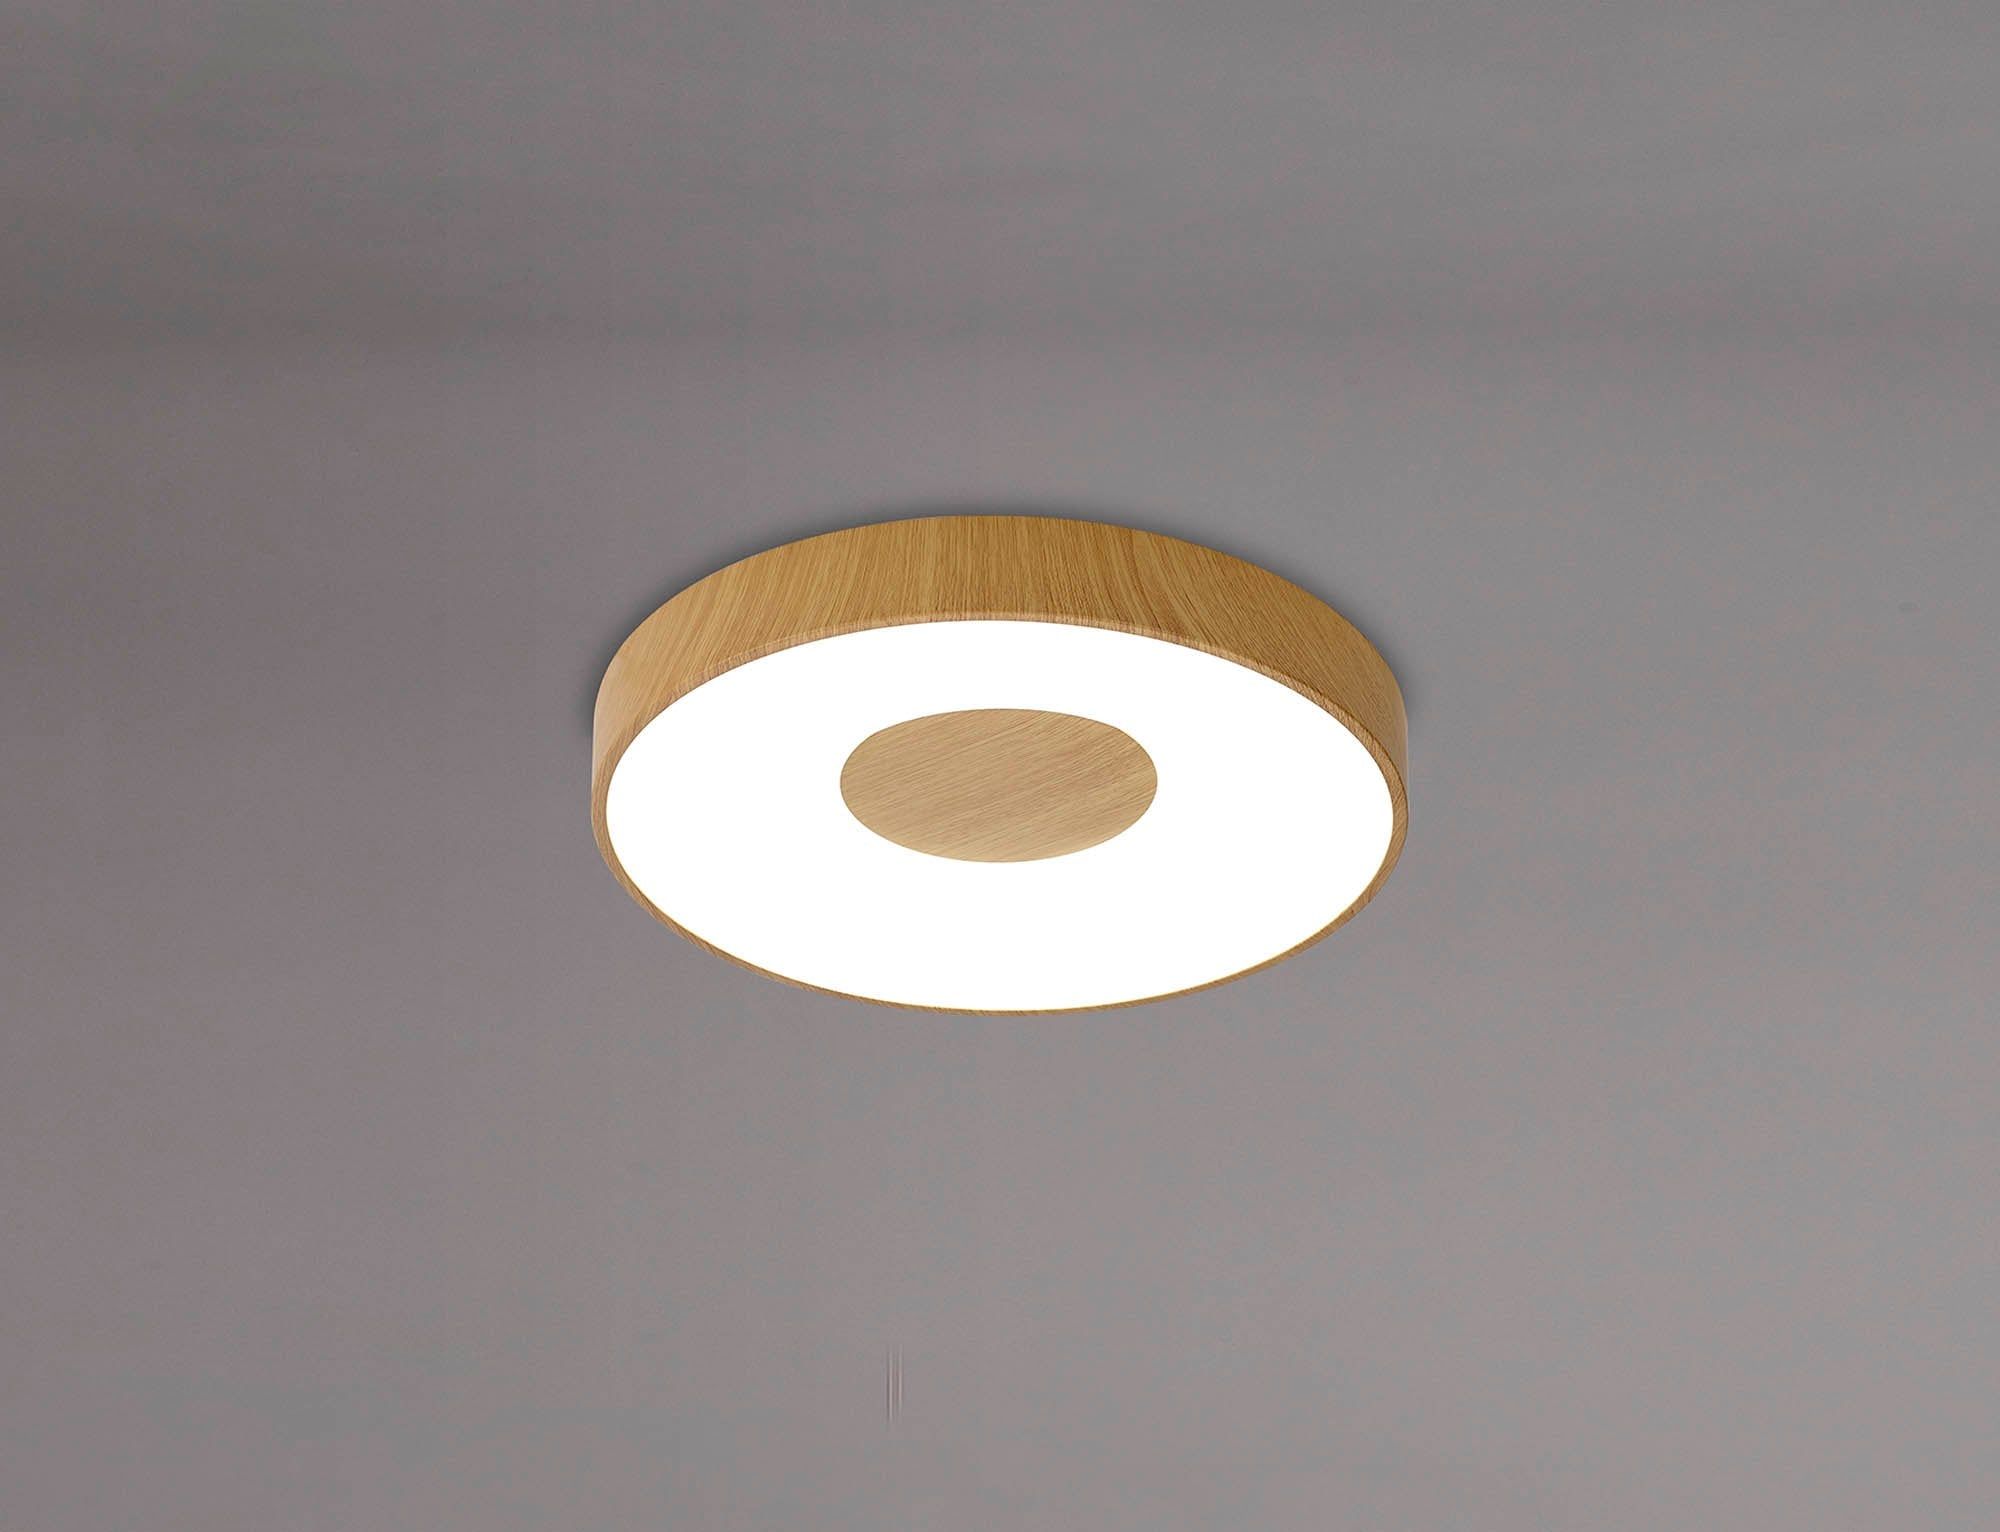 Coin Round Ceiling 56W LED With Remote Control 2700K-5000K, 2500lm, Wood Effect, 3yrs Warranty